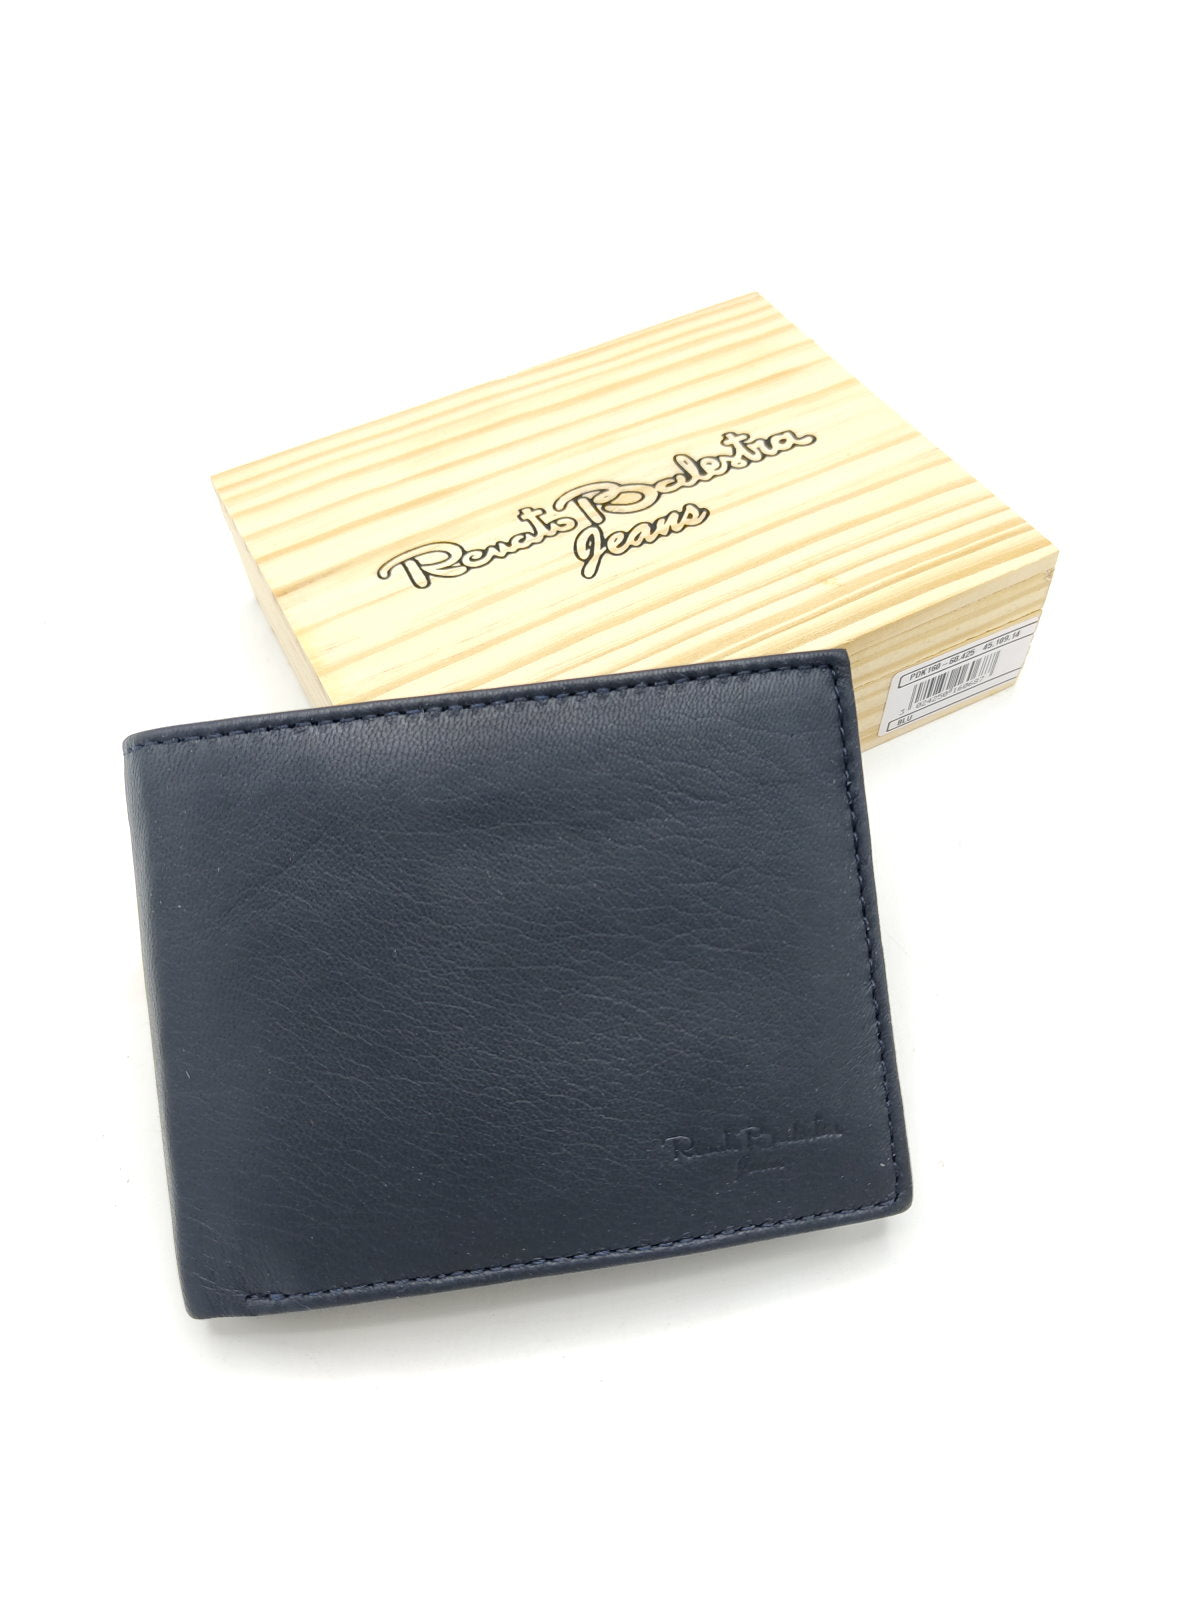 Genuine leather wallet for Men, Brand Renato Balestra Jeans, with wooden box, art. PDK160-68.425